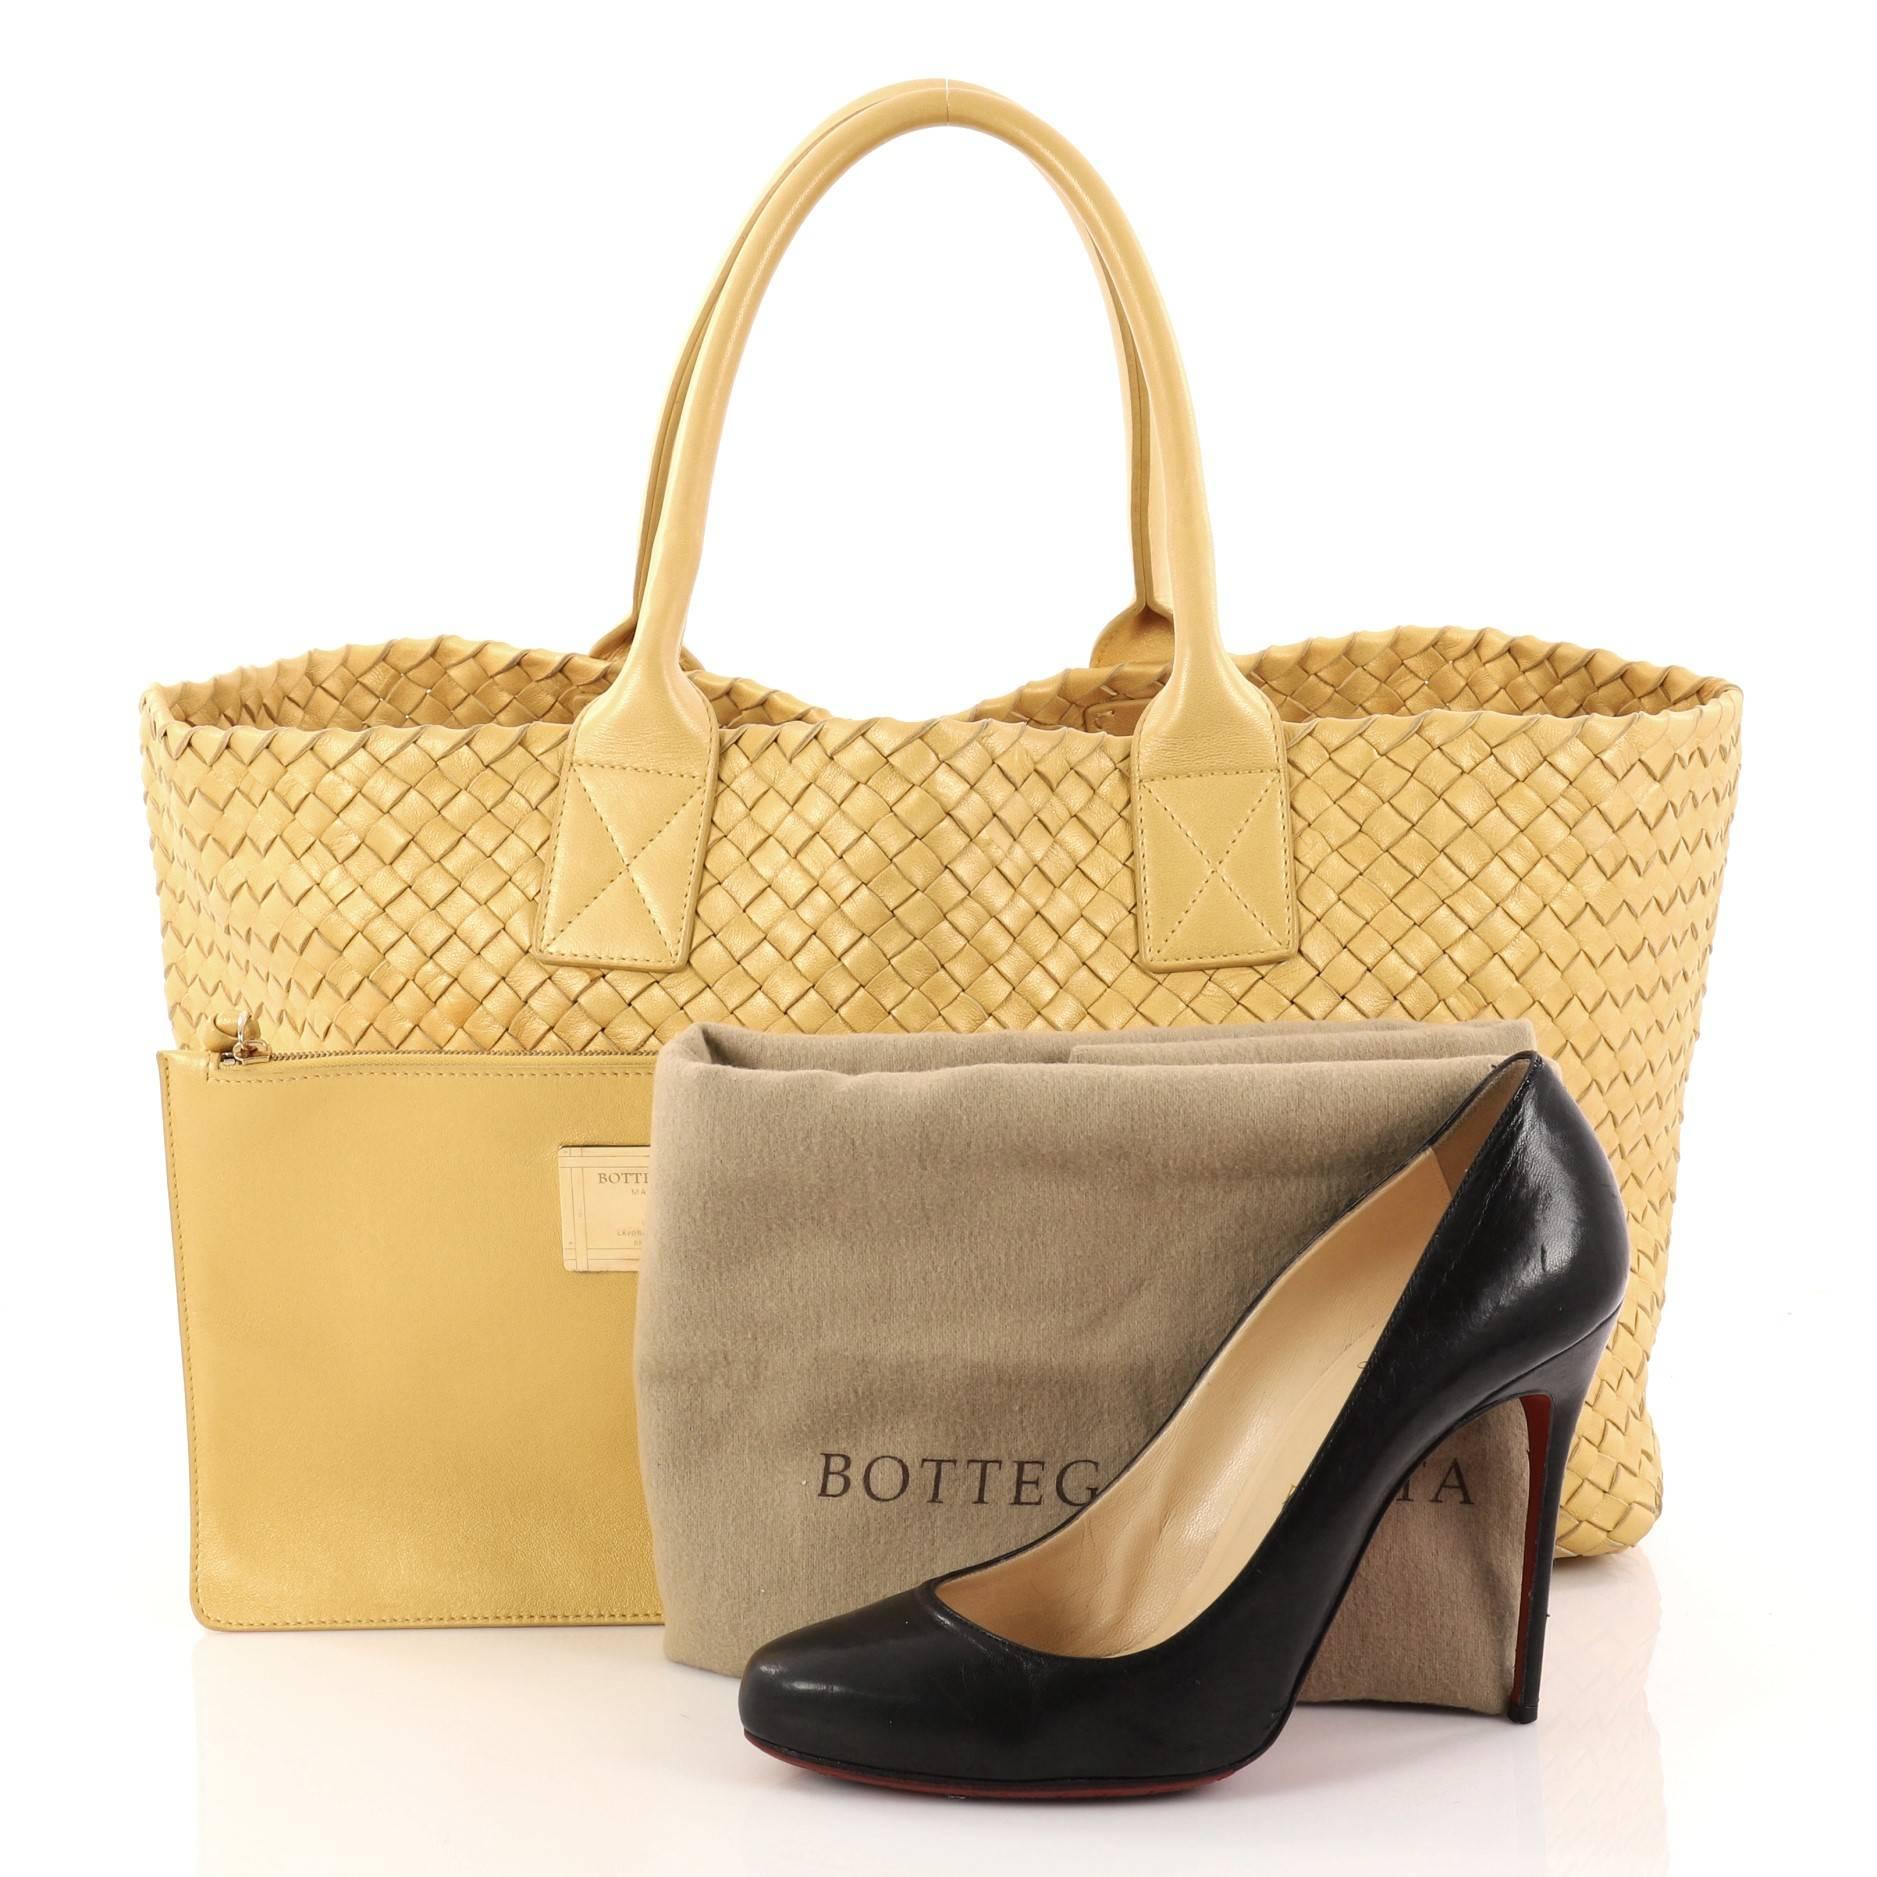 This authentic Bottega Veneta Cabat Tote Intrecciato Nappa Medium is a statement piece you can surely take from day to night. Beautifully crafted in gold leather in Bottega Veneta's signature intrecciato woven method, this oversized stylish tote